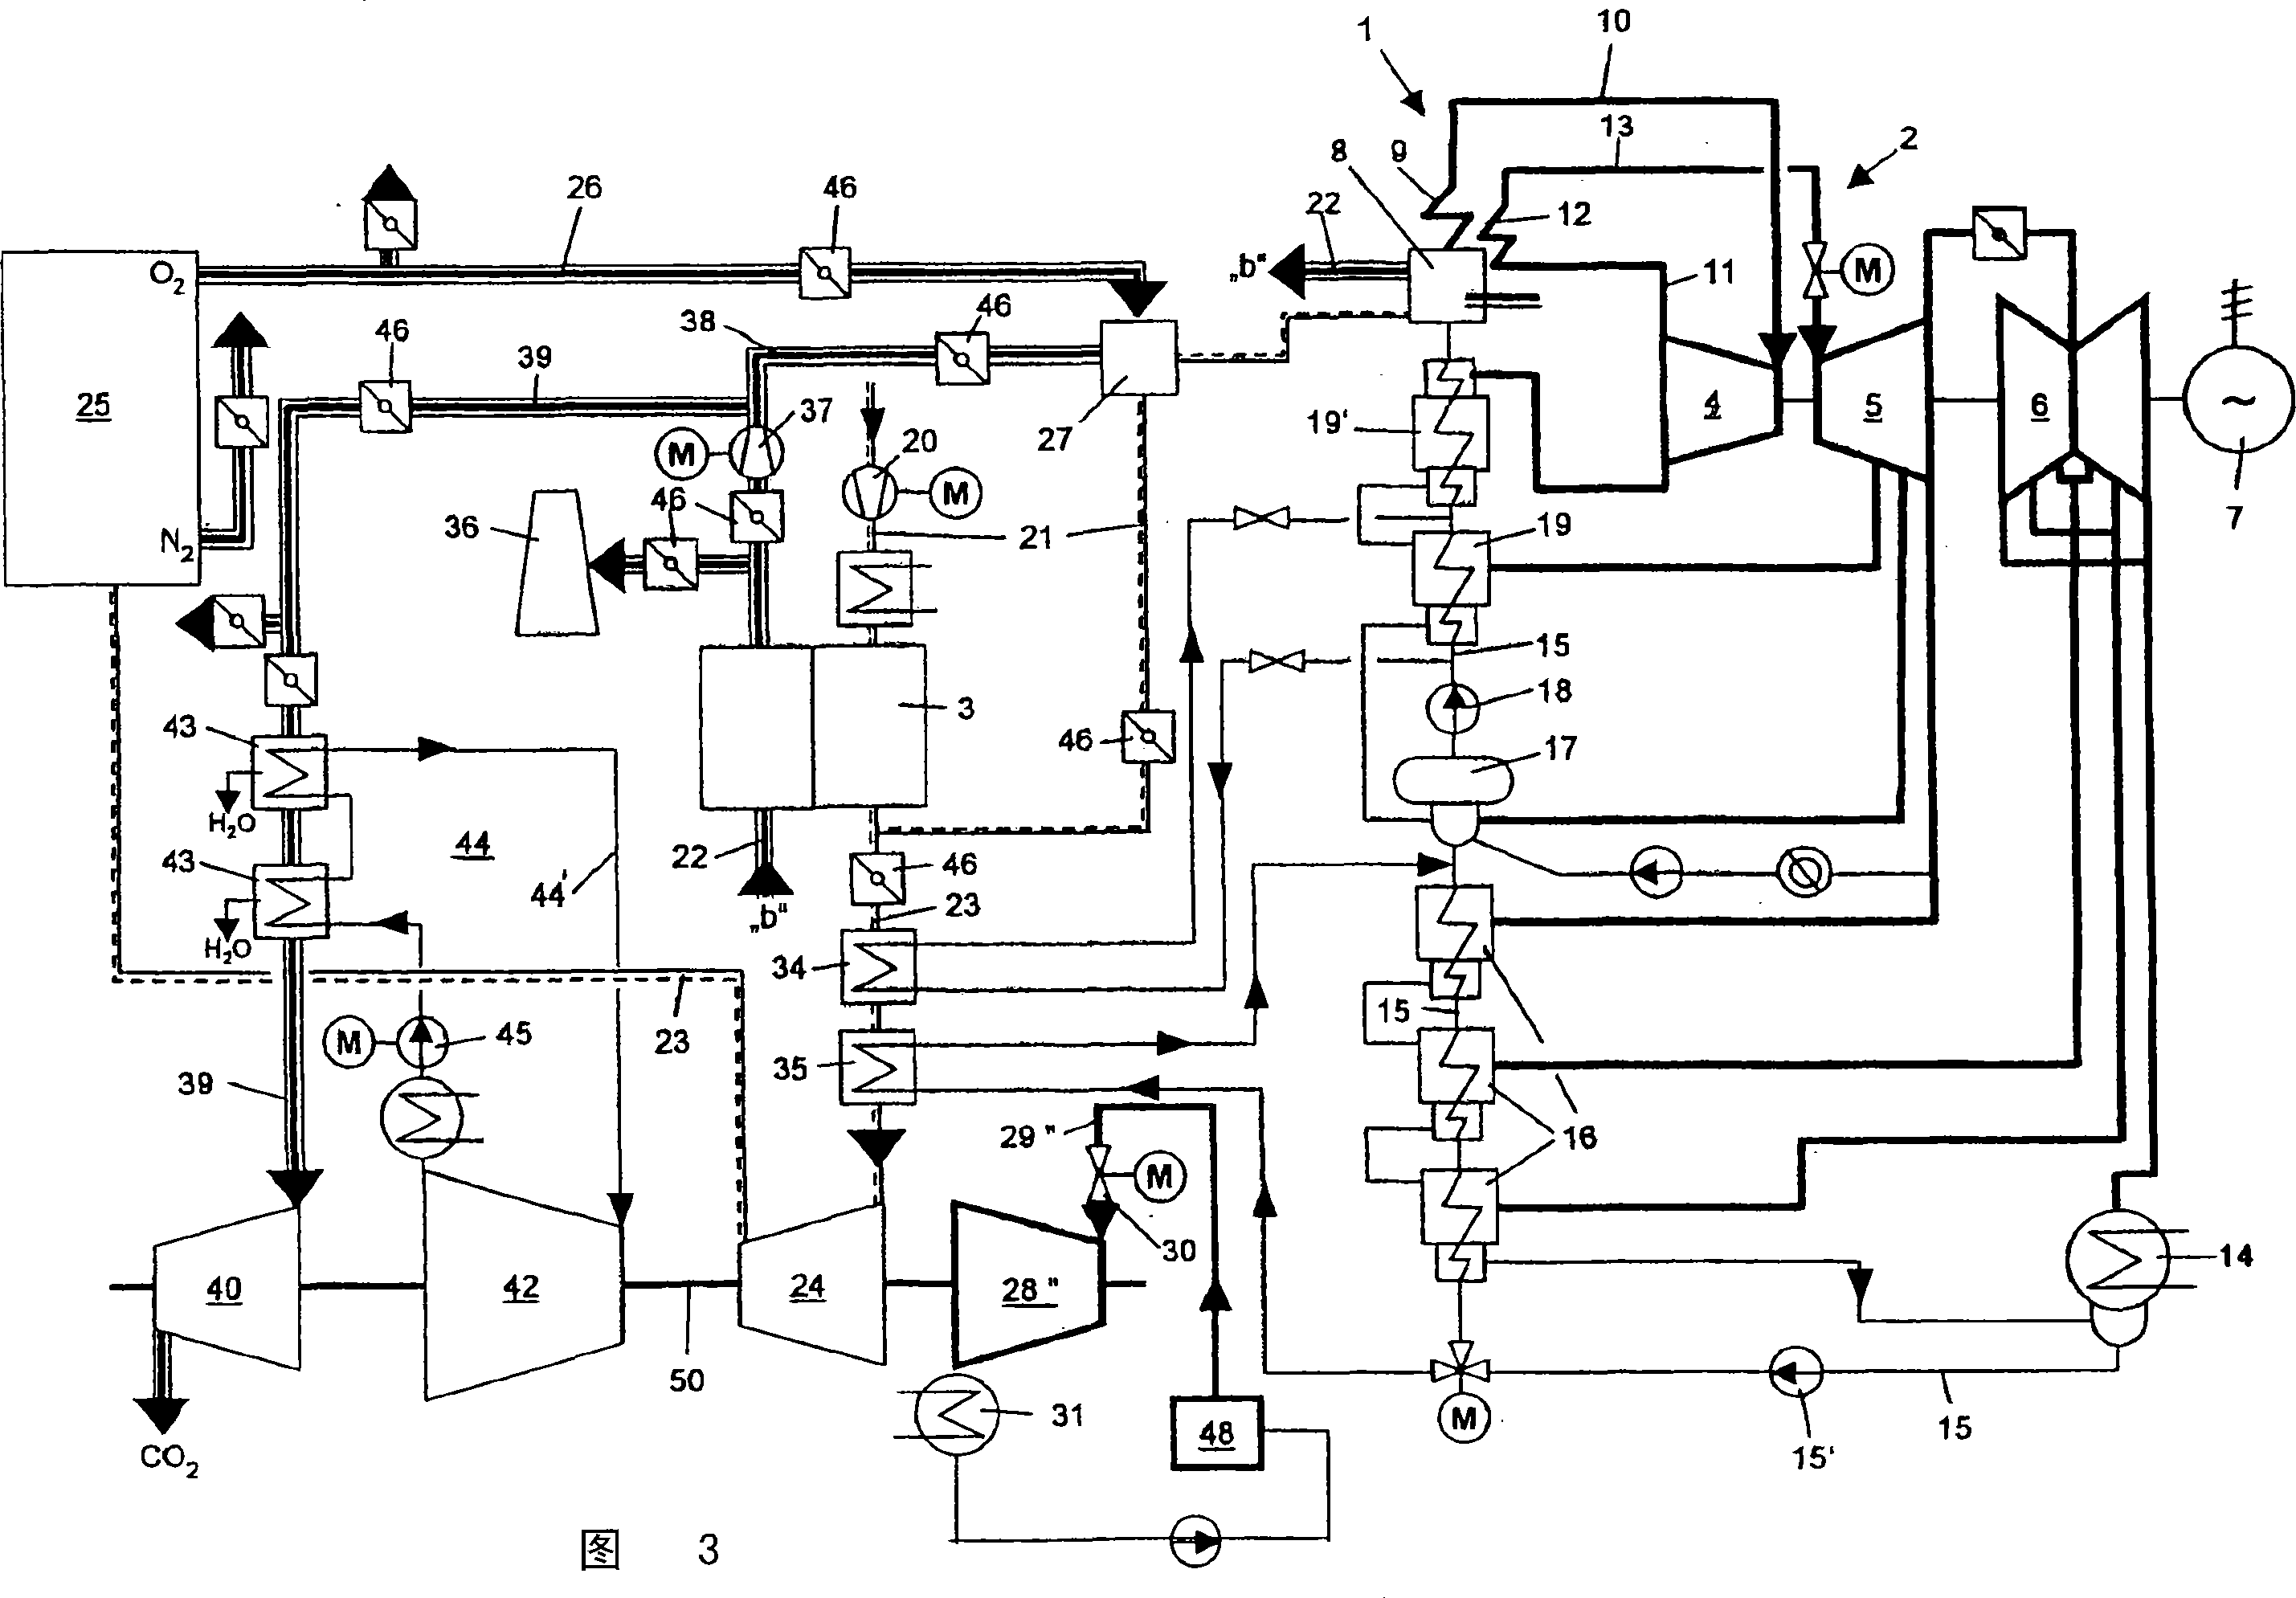 Steam generation plant and method for operation and retrofitting of a steam generation plant